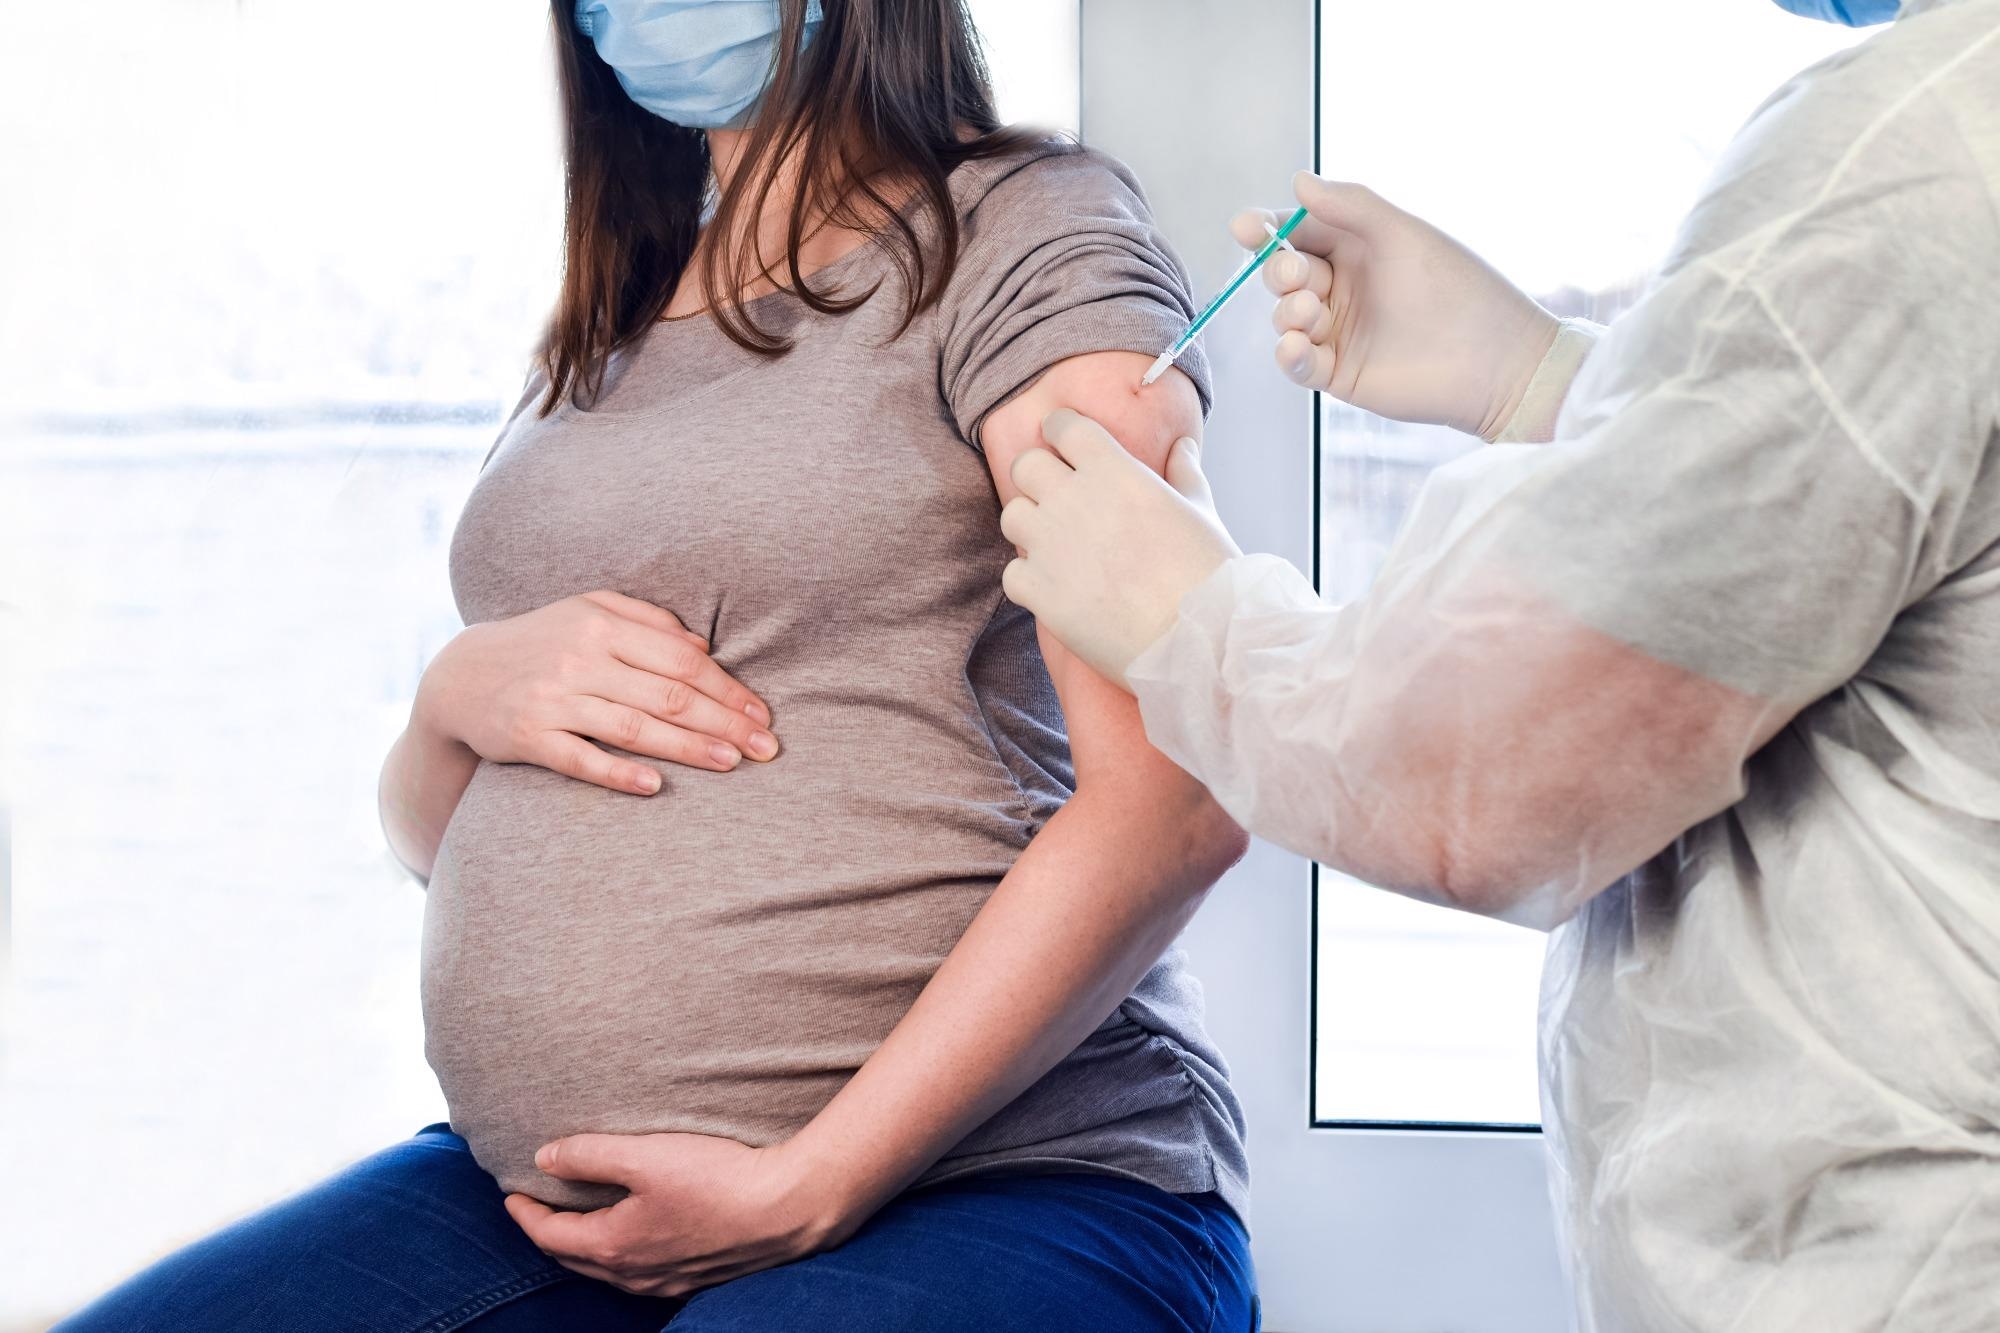 Study: Safety of COVID-19 Vaccines During Pregnancy: A Systematic Review and Meta-Analysis. Image Credit: Marina Demidiuk / Shutterstock